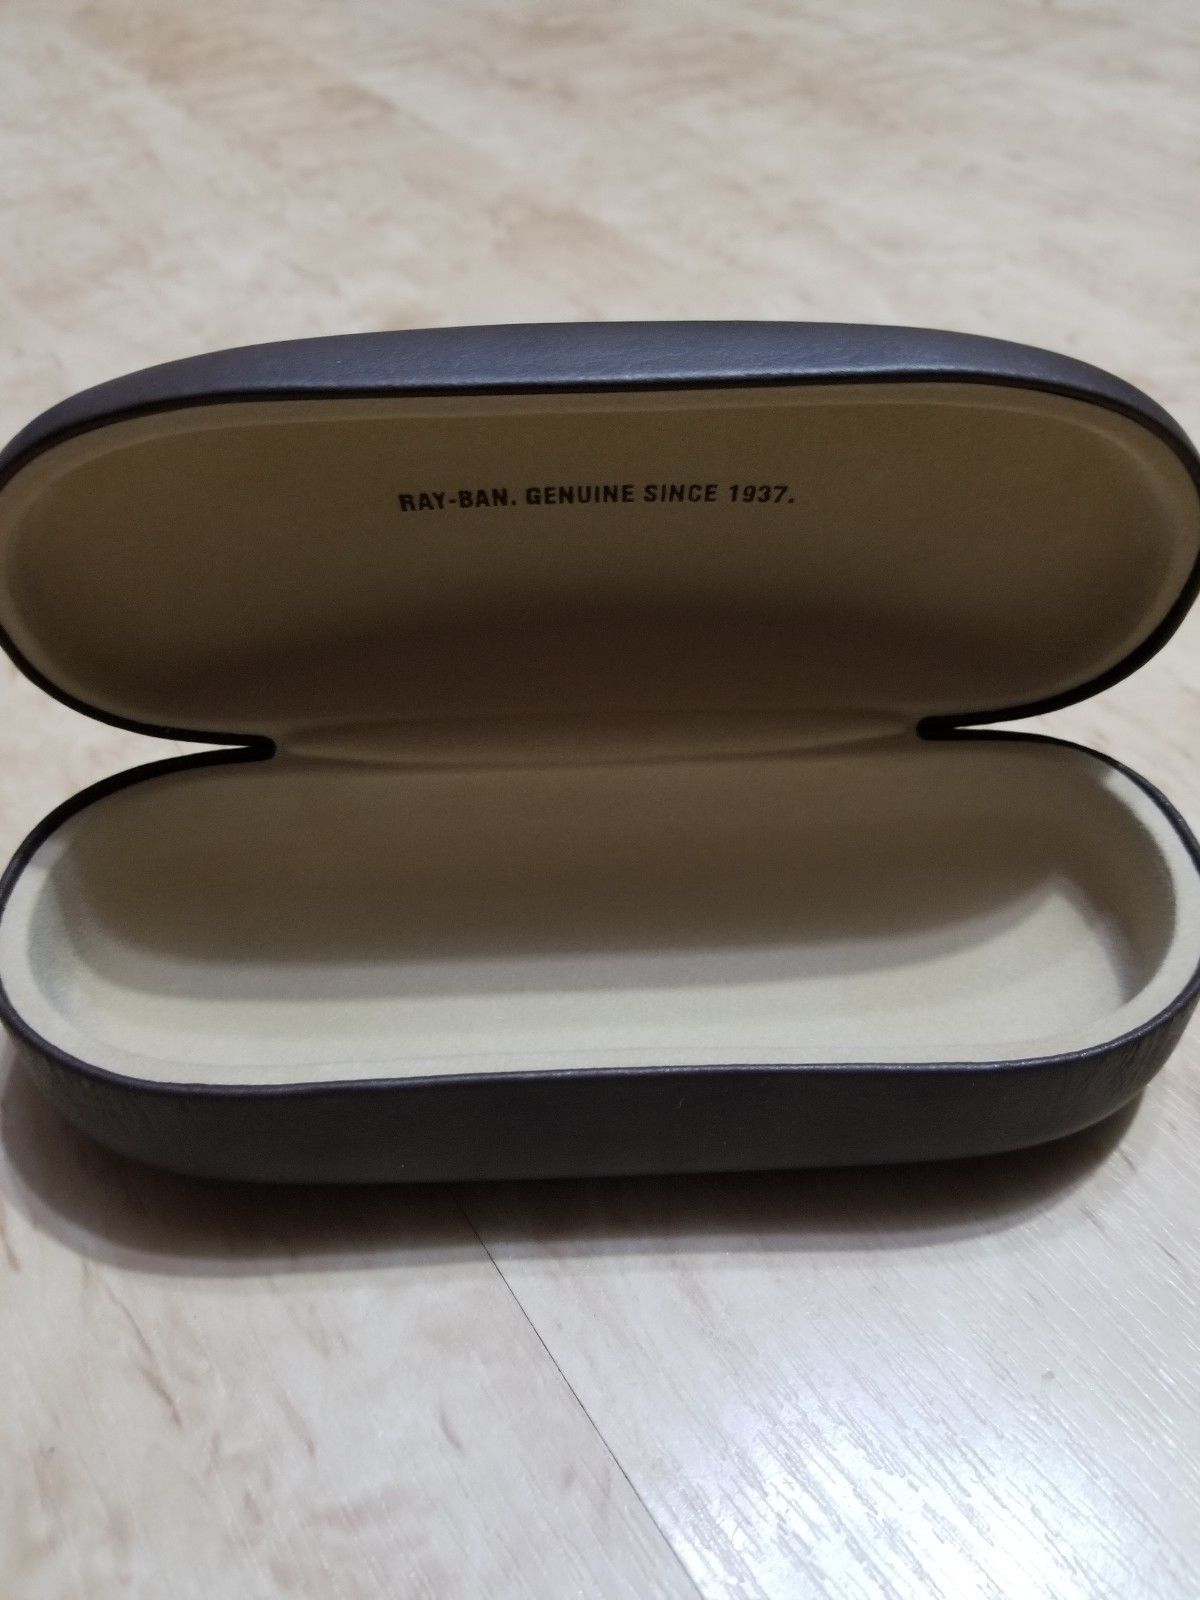 ray ban clamshell case